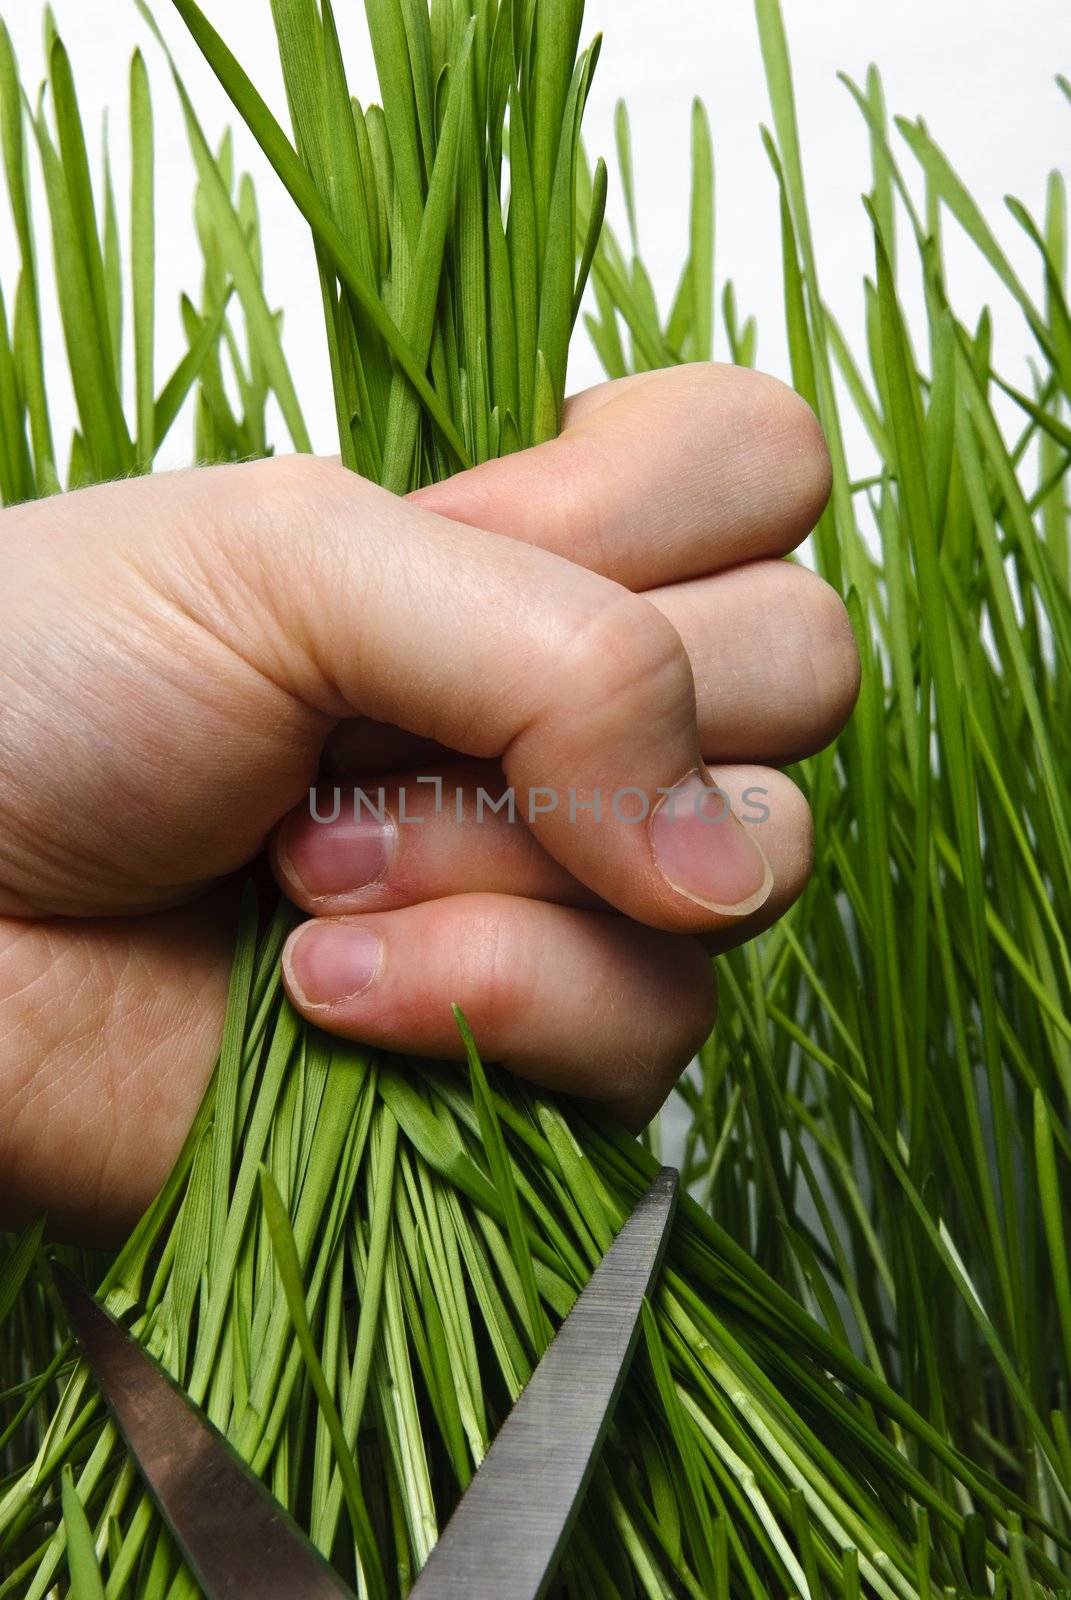 Cutting wheat shoot with scissors. by signum